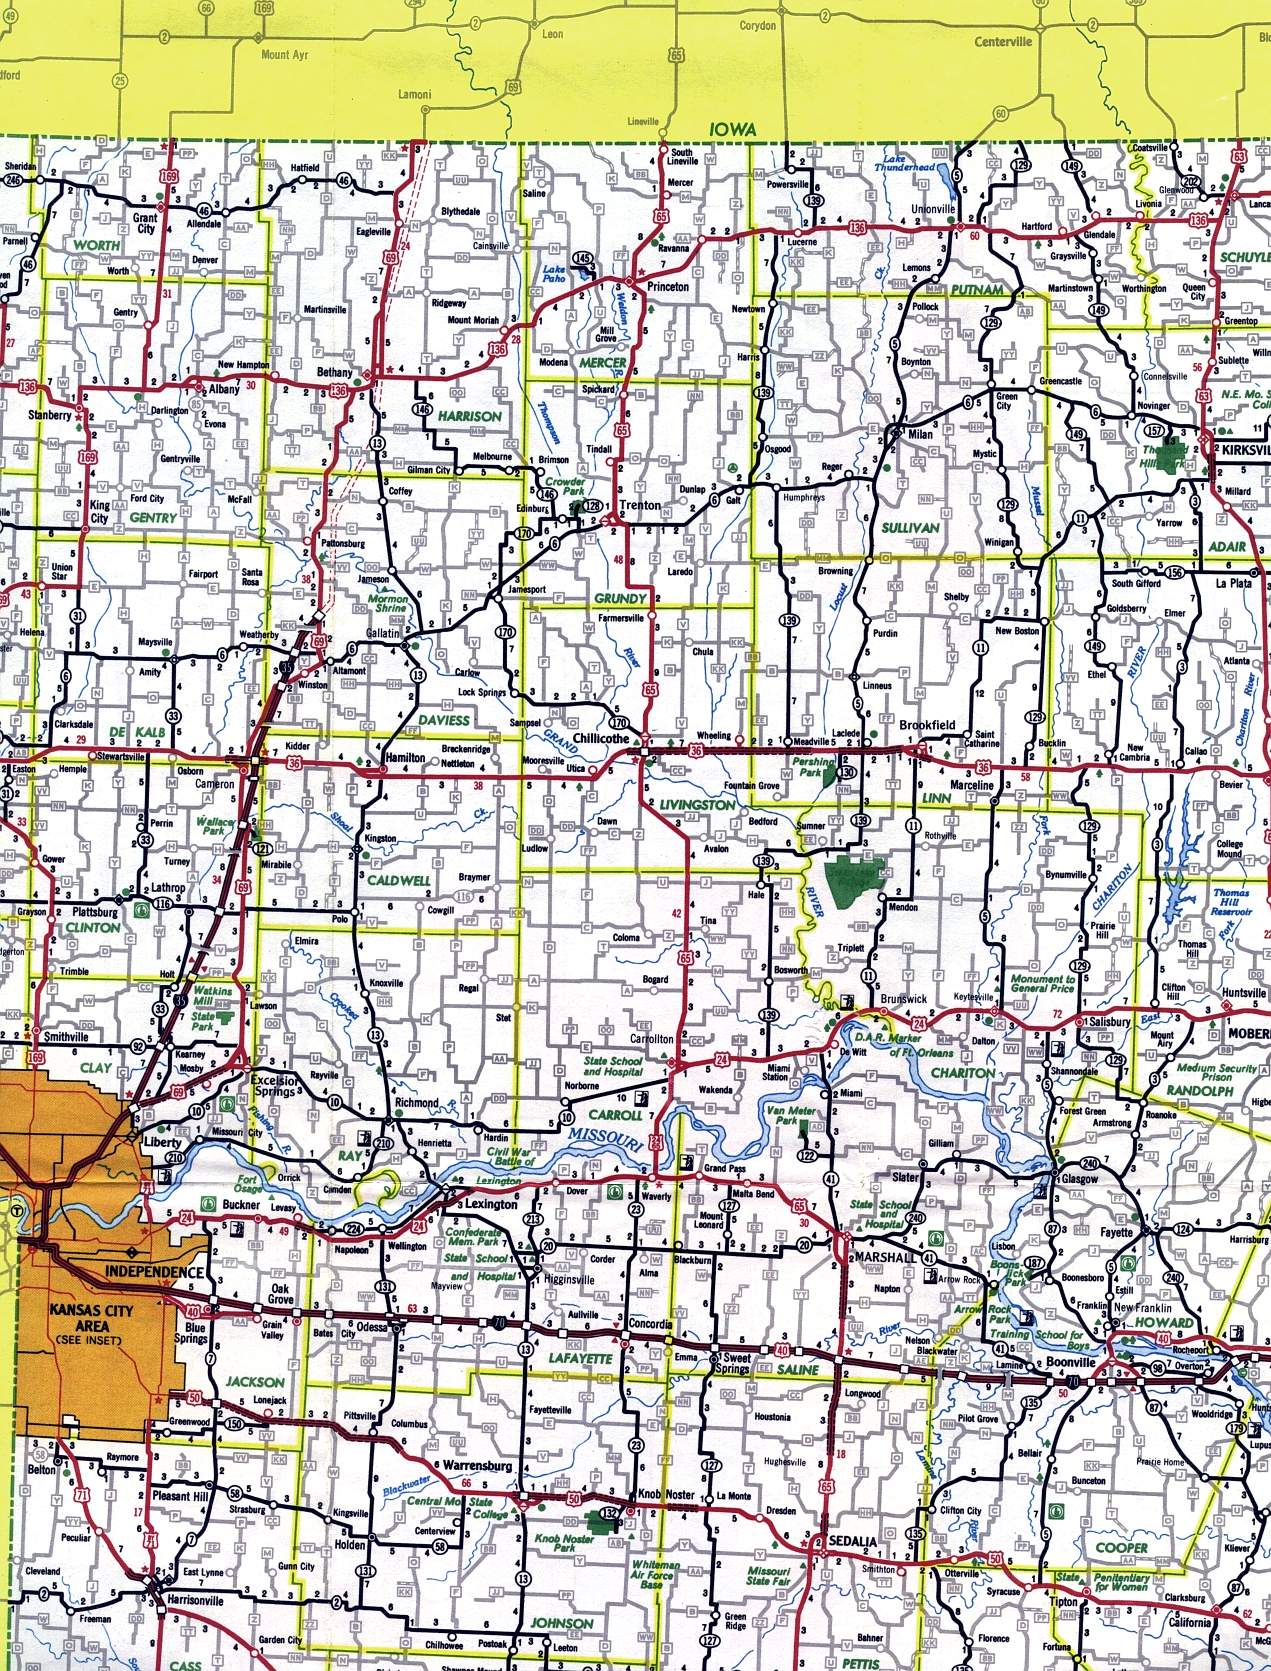 Northwest-central section of Missouri from 1969 official highway map